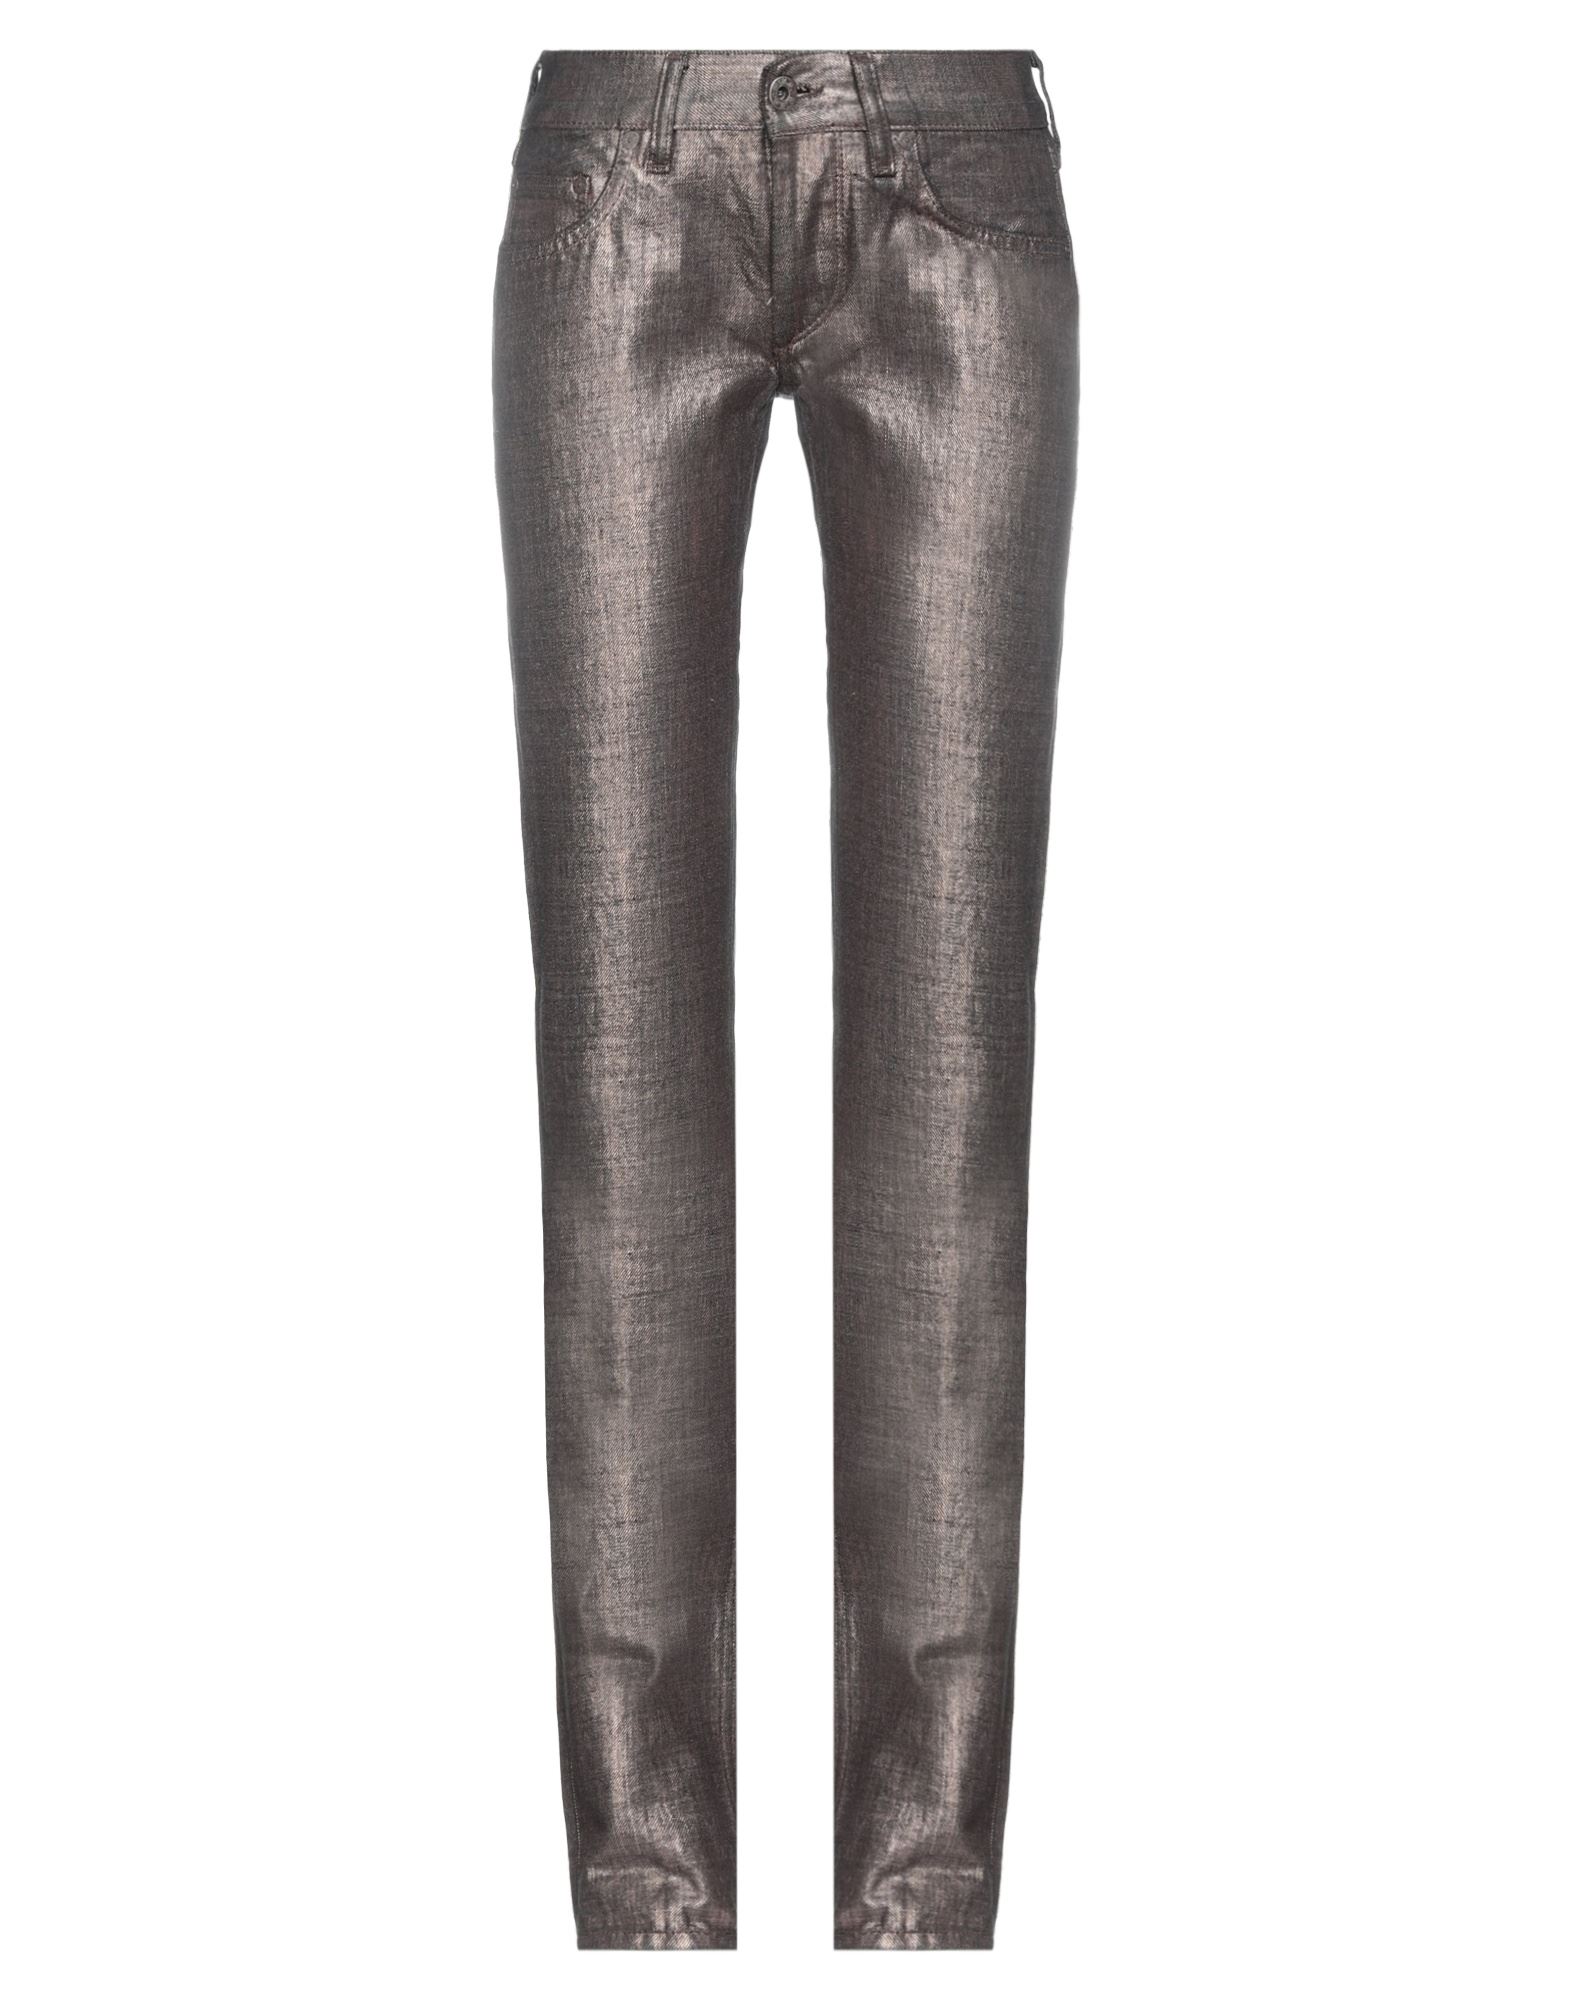 Mauro Grifoni Jeans In Copper